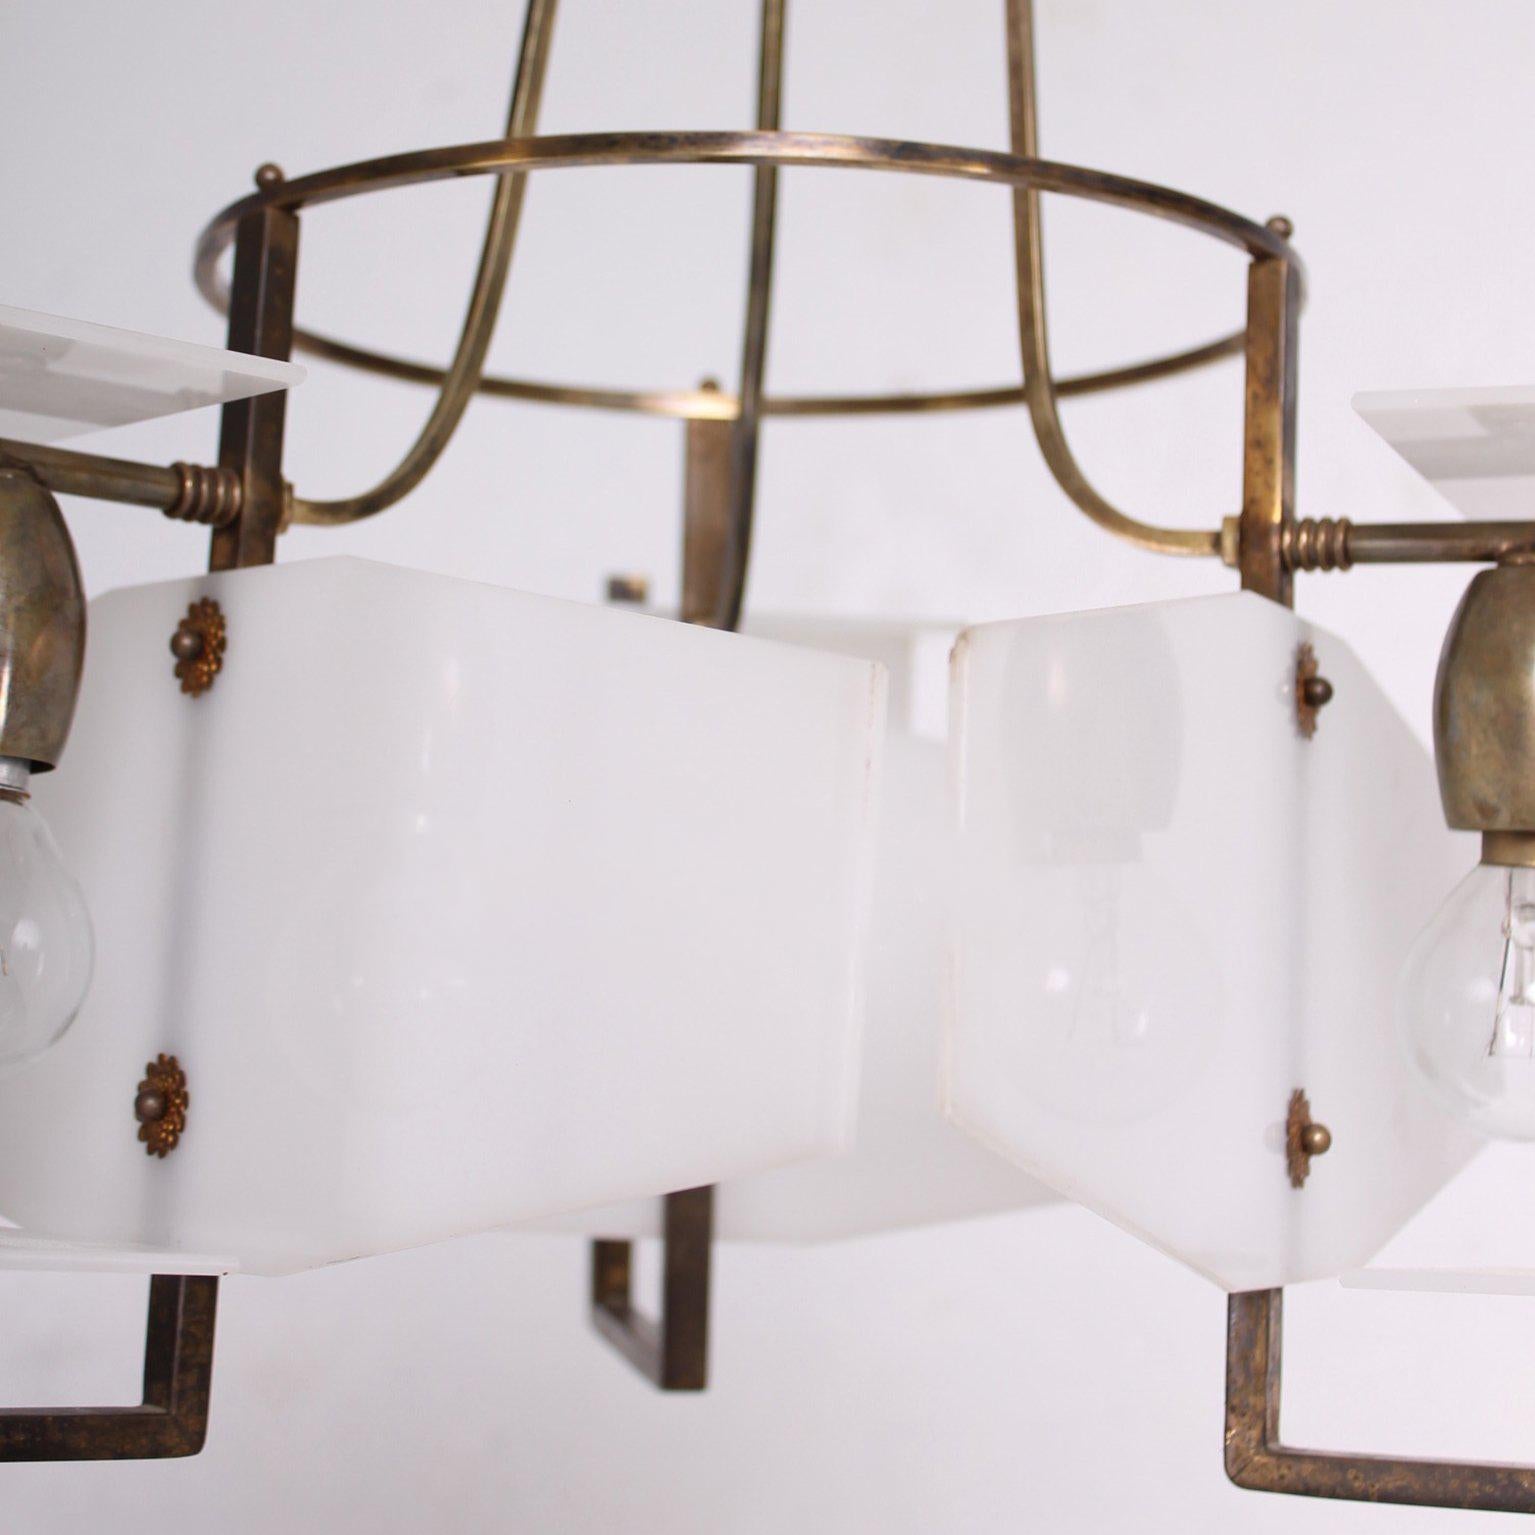 For your consideration a vintage modern chandelier made in Italy. Constructed with brass and plexiglass in white color. 

The chandelier has been rewired and it is ready to go. The brass has a beautiful brown patina. The plexiglass is the original